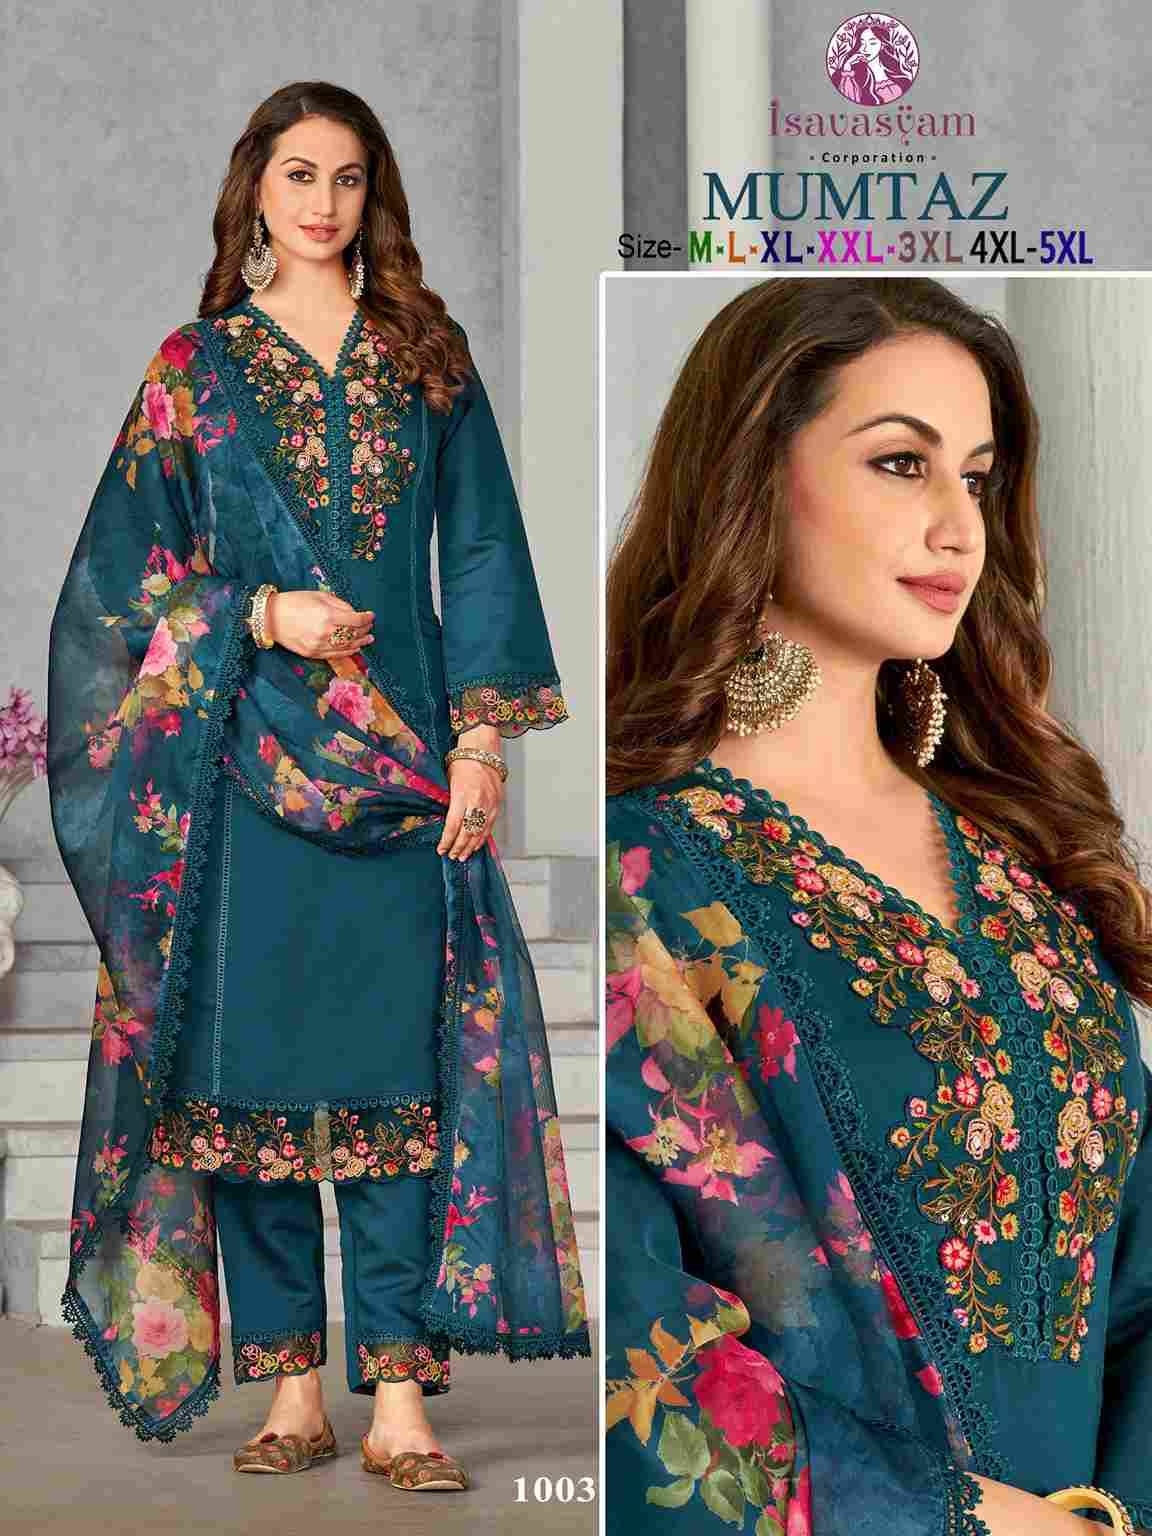 Mumtaz By Isavasyam 1001 To 1006 Series Designer Stylish Fancy Colorful Beautiful Party Wear & Ethnic Wear Collection Pure Silk Dresses At Wholesale Price